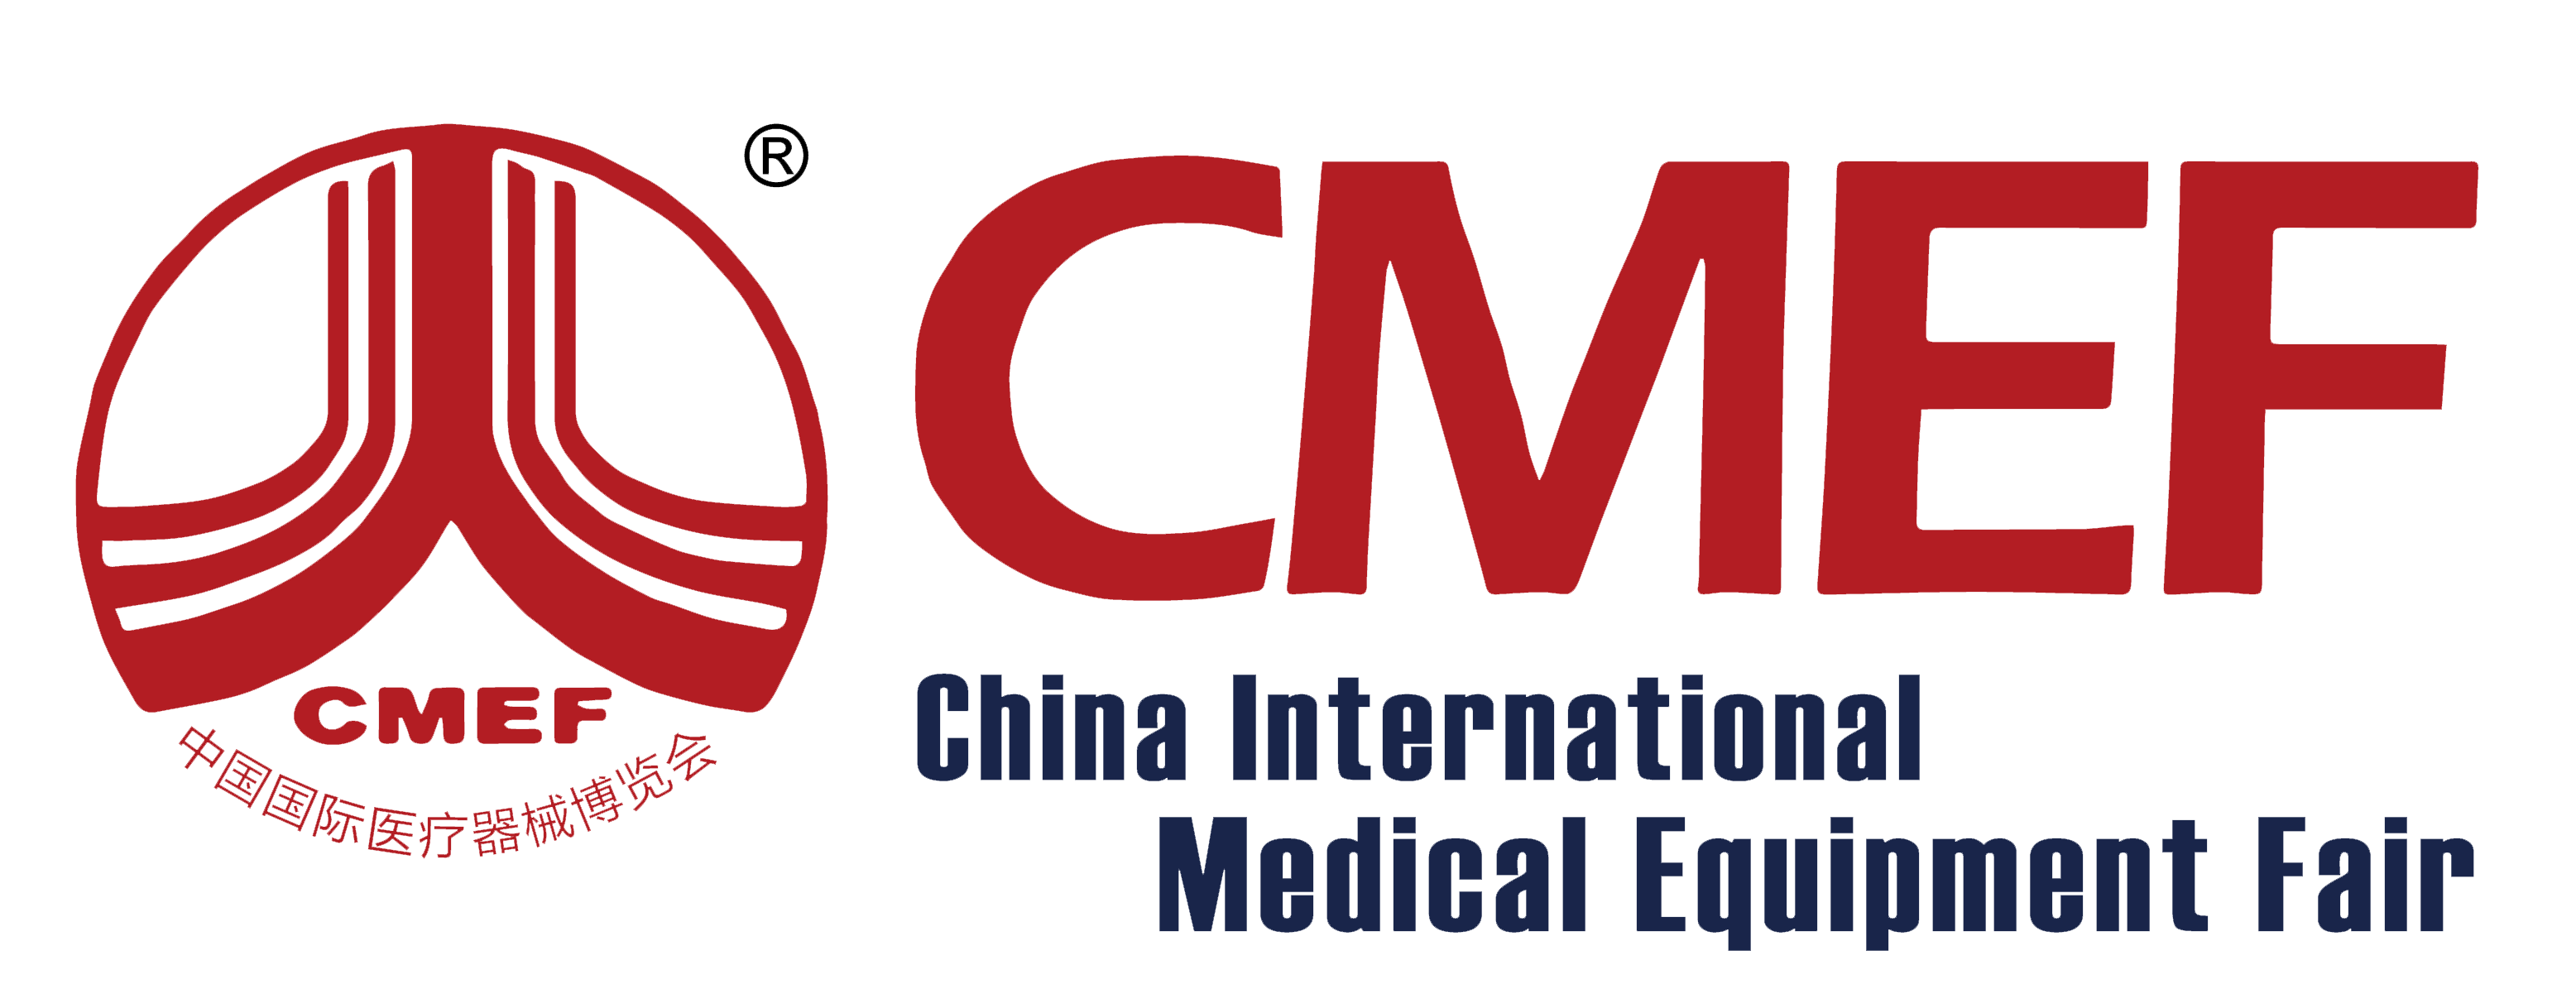 Rixin Medical invite you come to Shanghai CMEF!